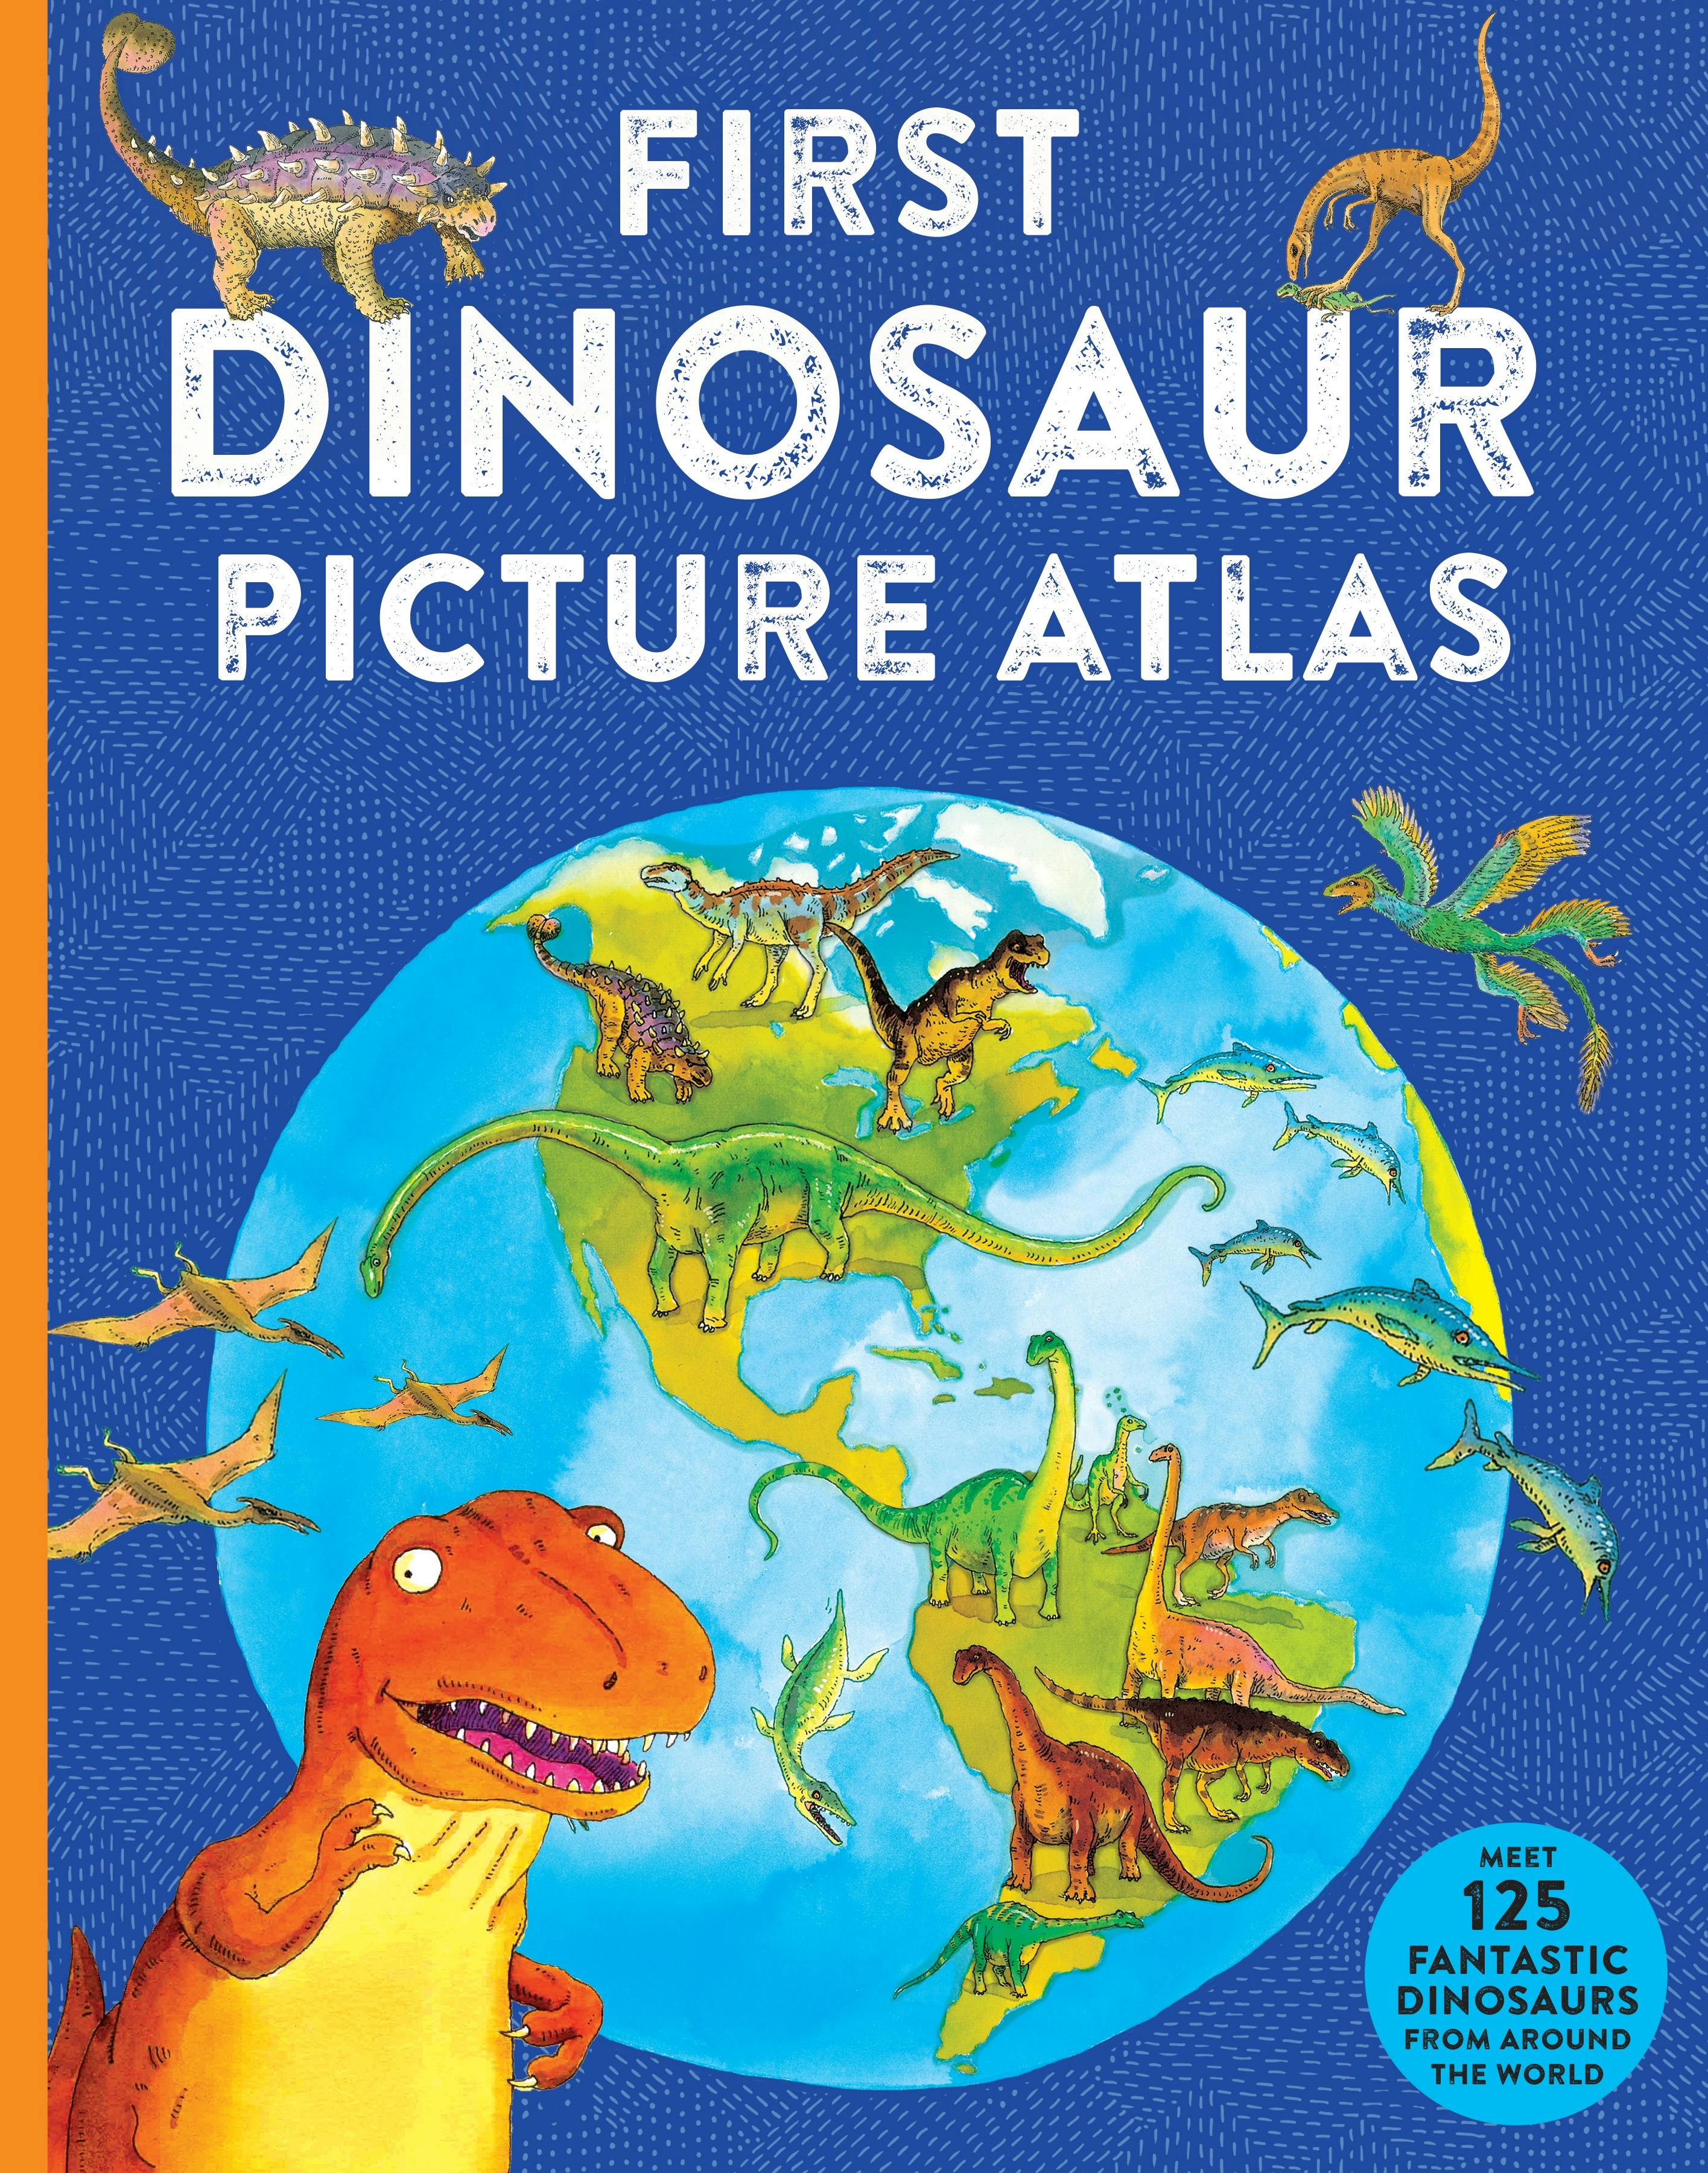 Image of First Dinosaur Picture Atlas